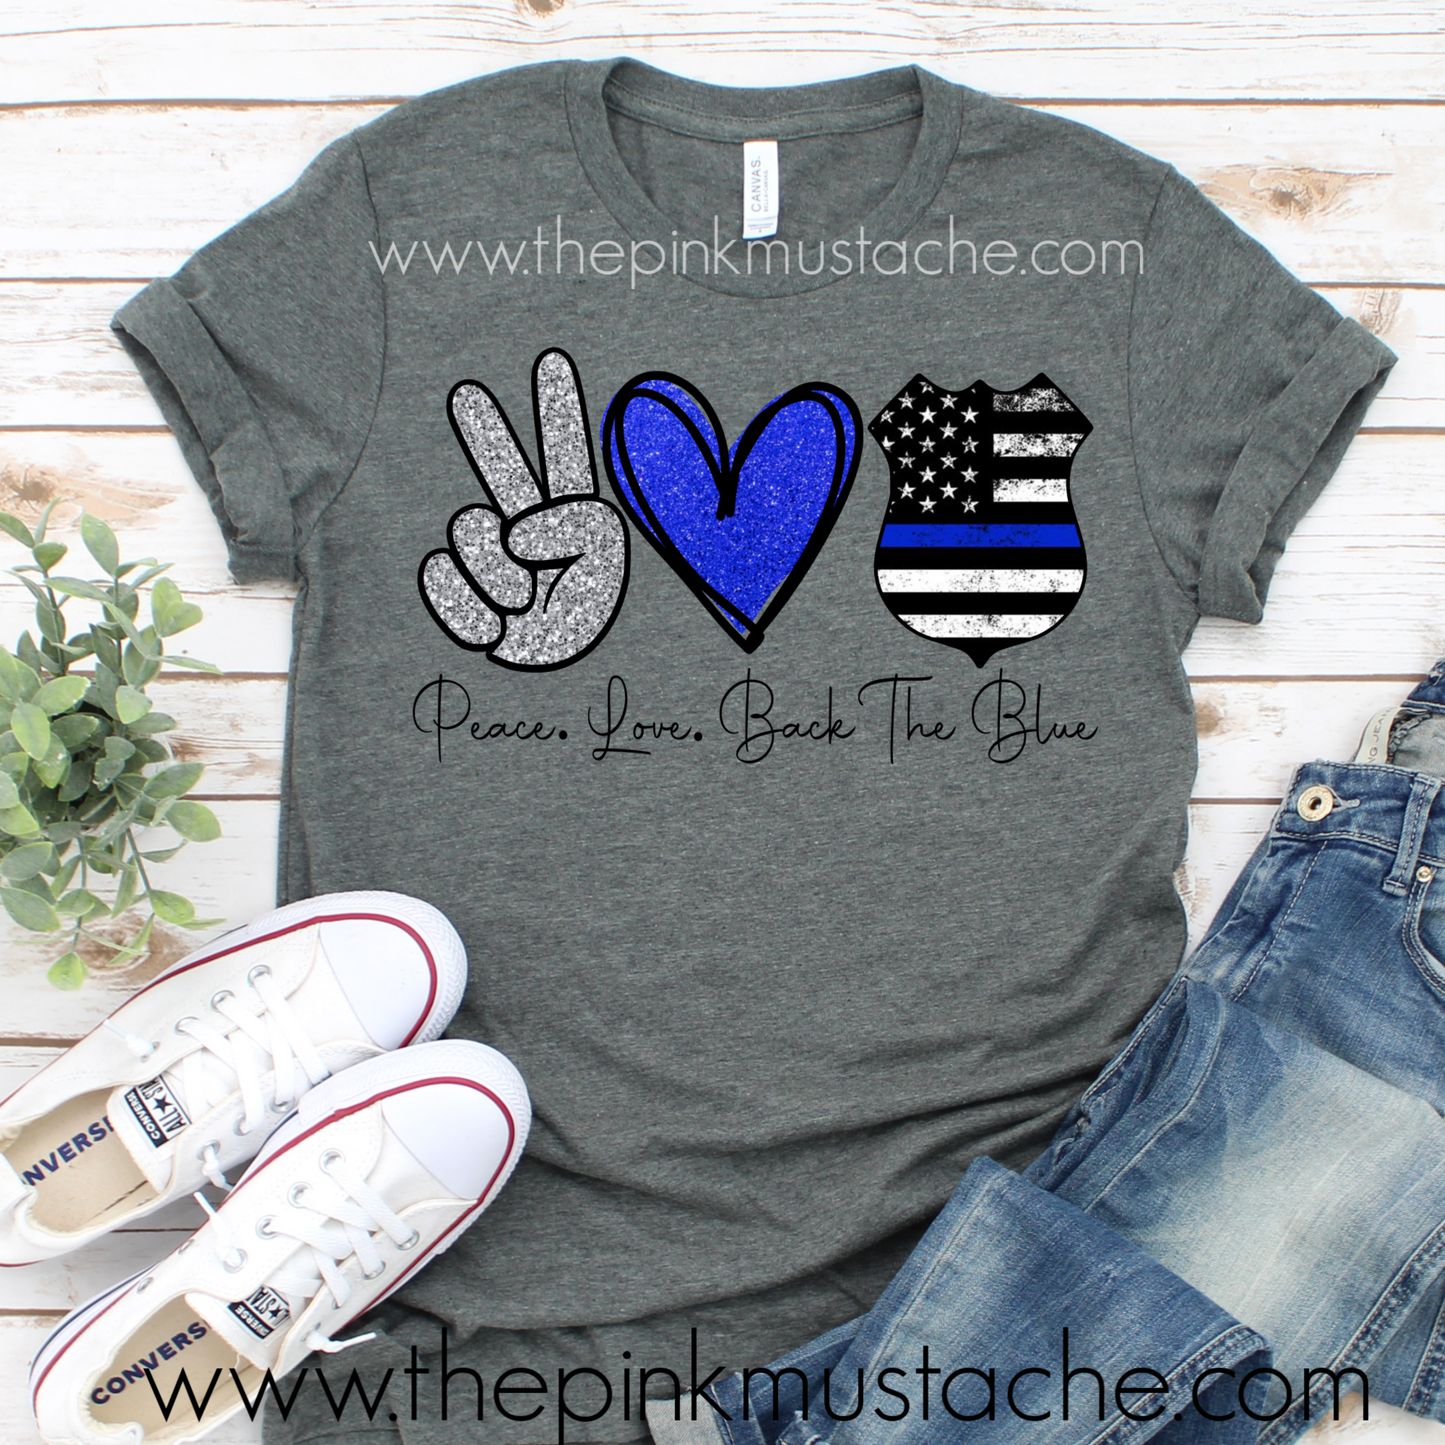 Peace Love Back The Blue Tee / Police Officer Tee/ Youth and Adult Sizes Available